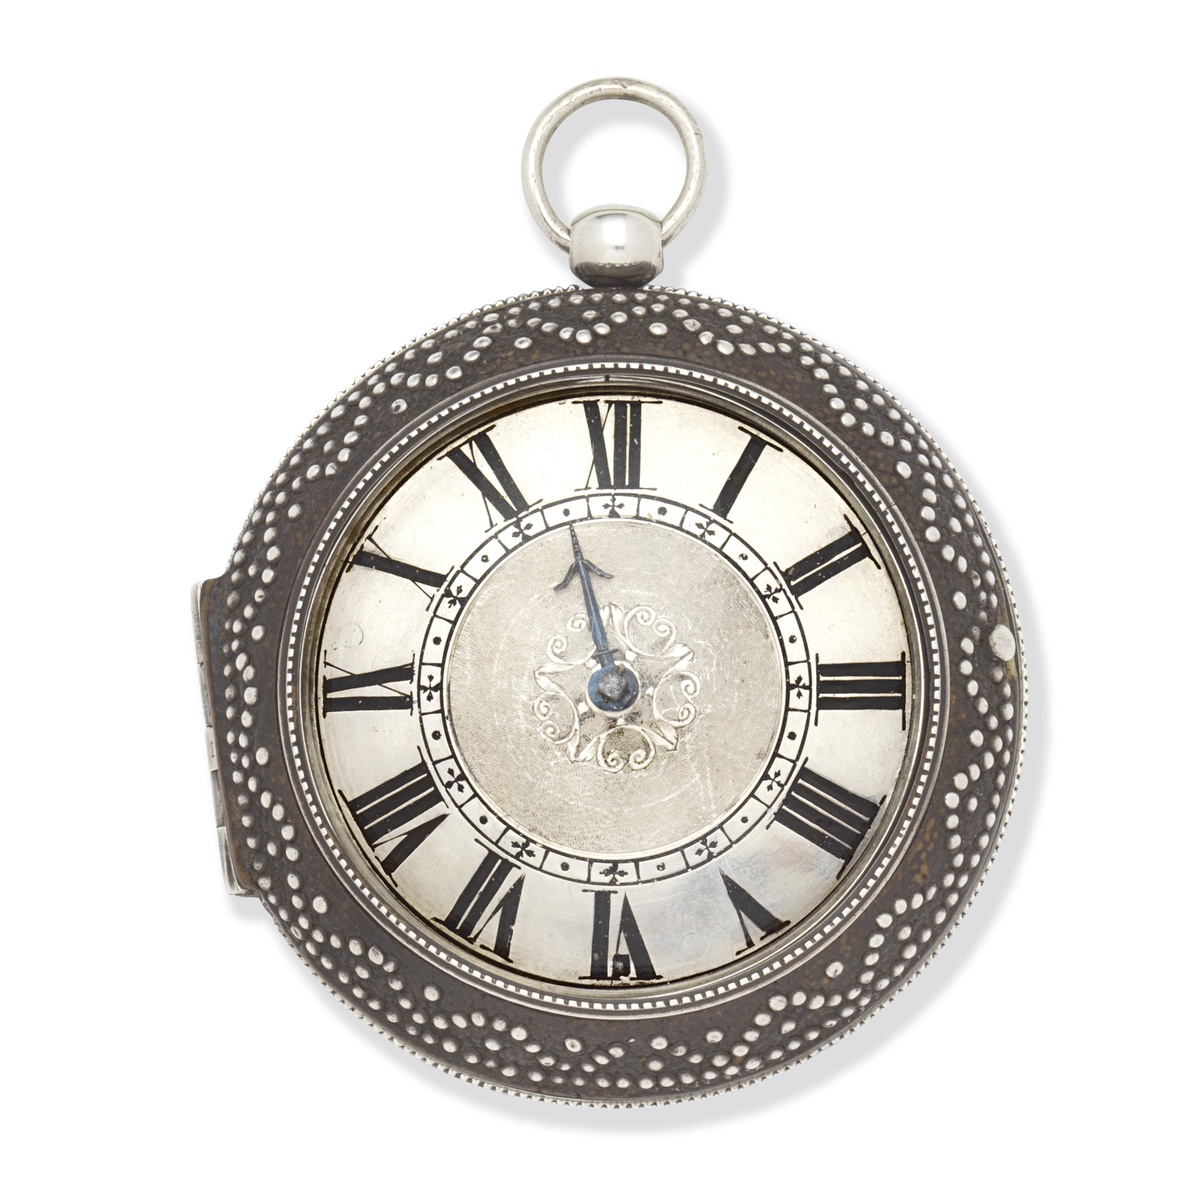 The Charming Epoch of British Pocket Watches: A Comprehensive Guide